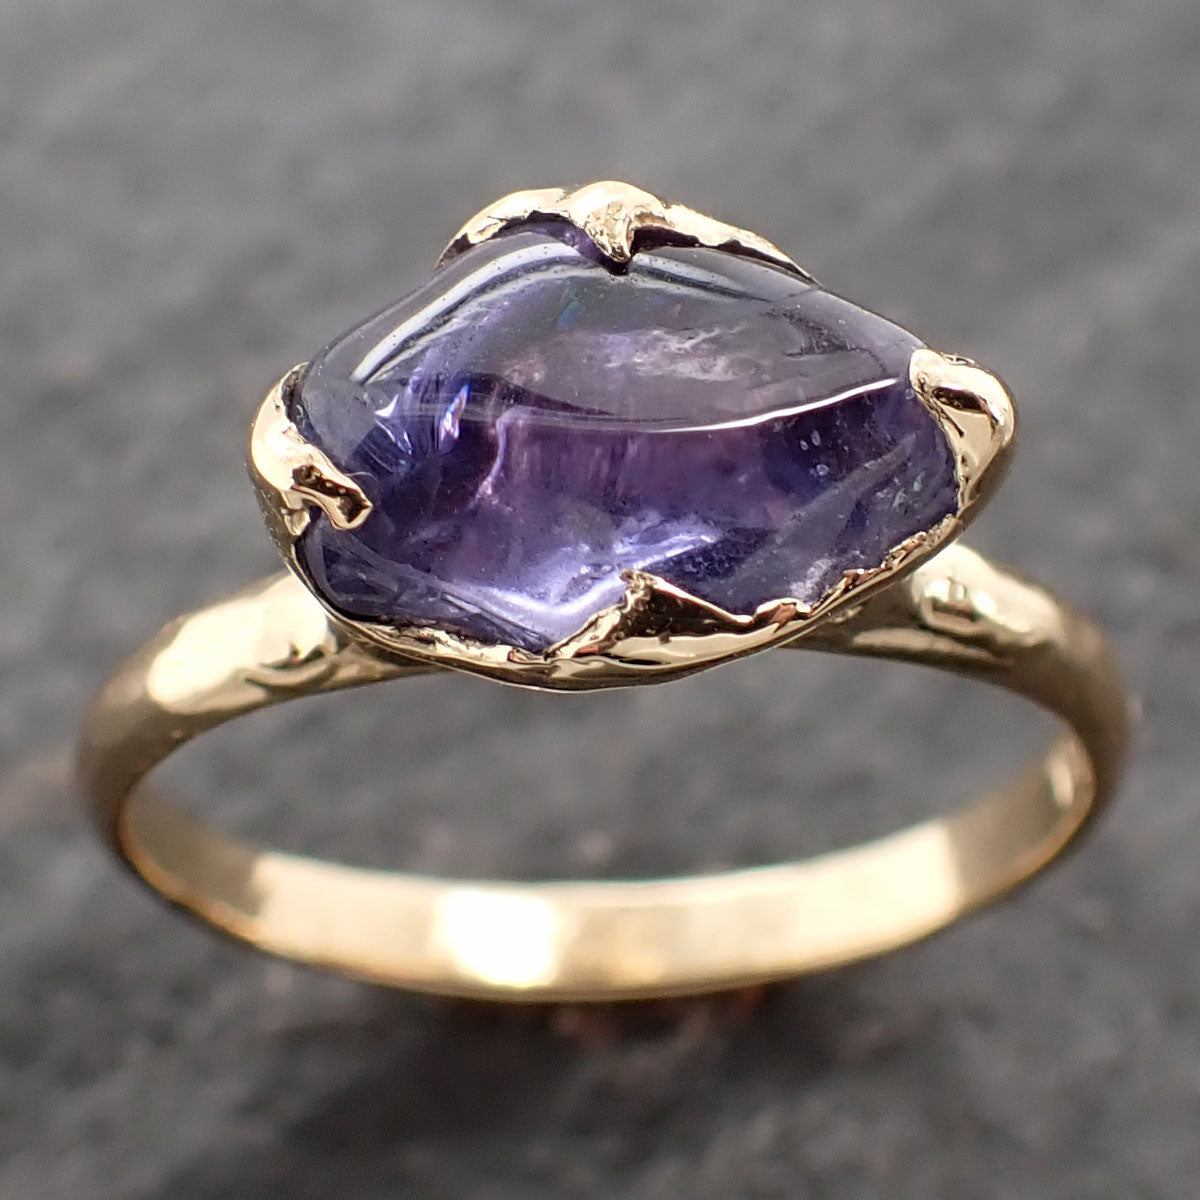 Sapphire tumbled purple violet tumbled yellow 18k gold Solitaire gemstone ring 2632